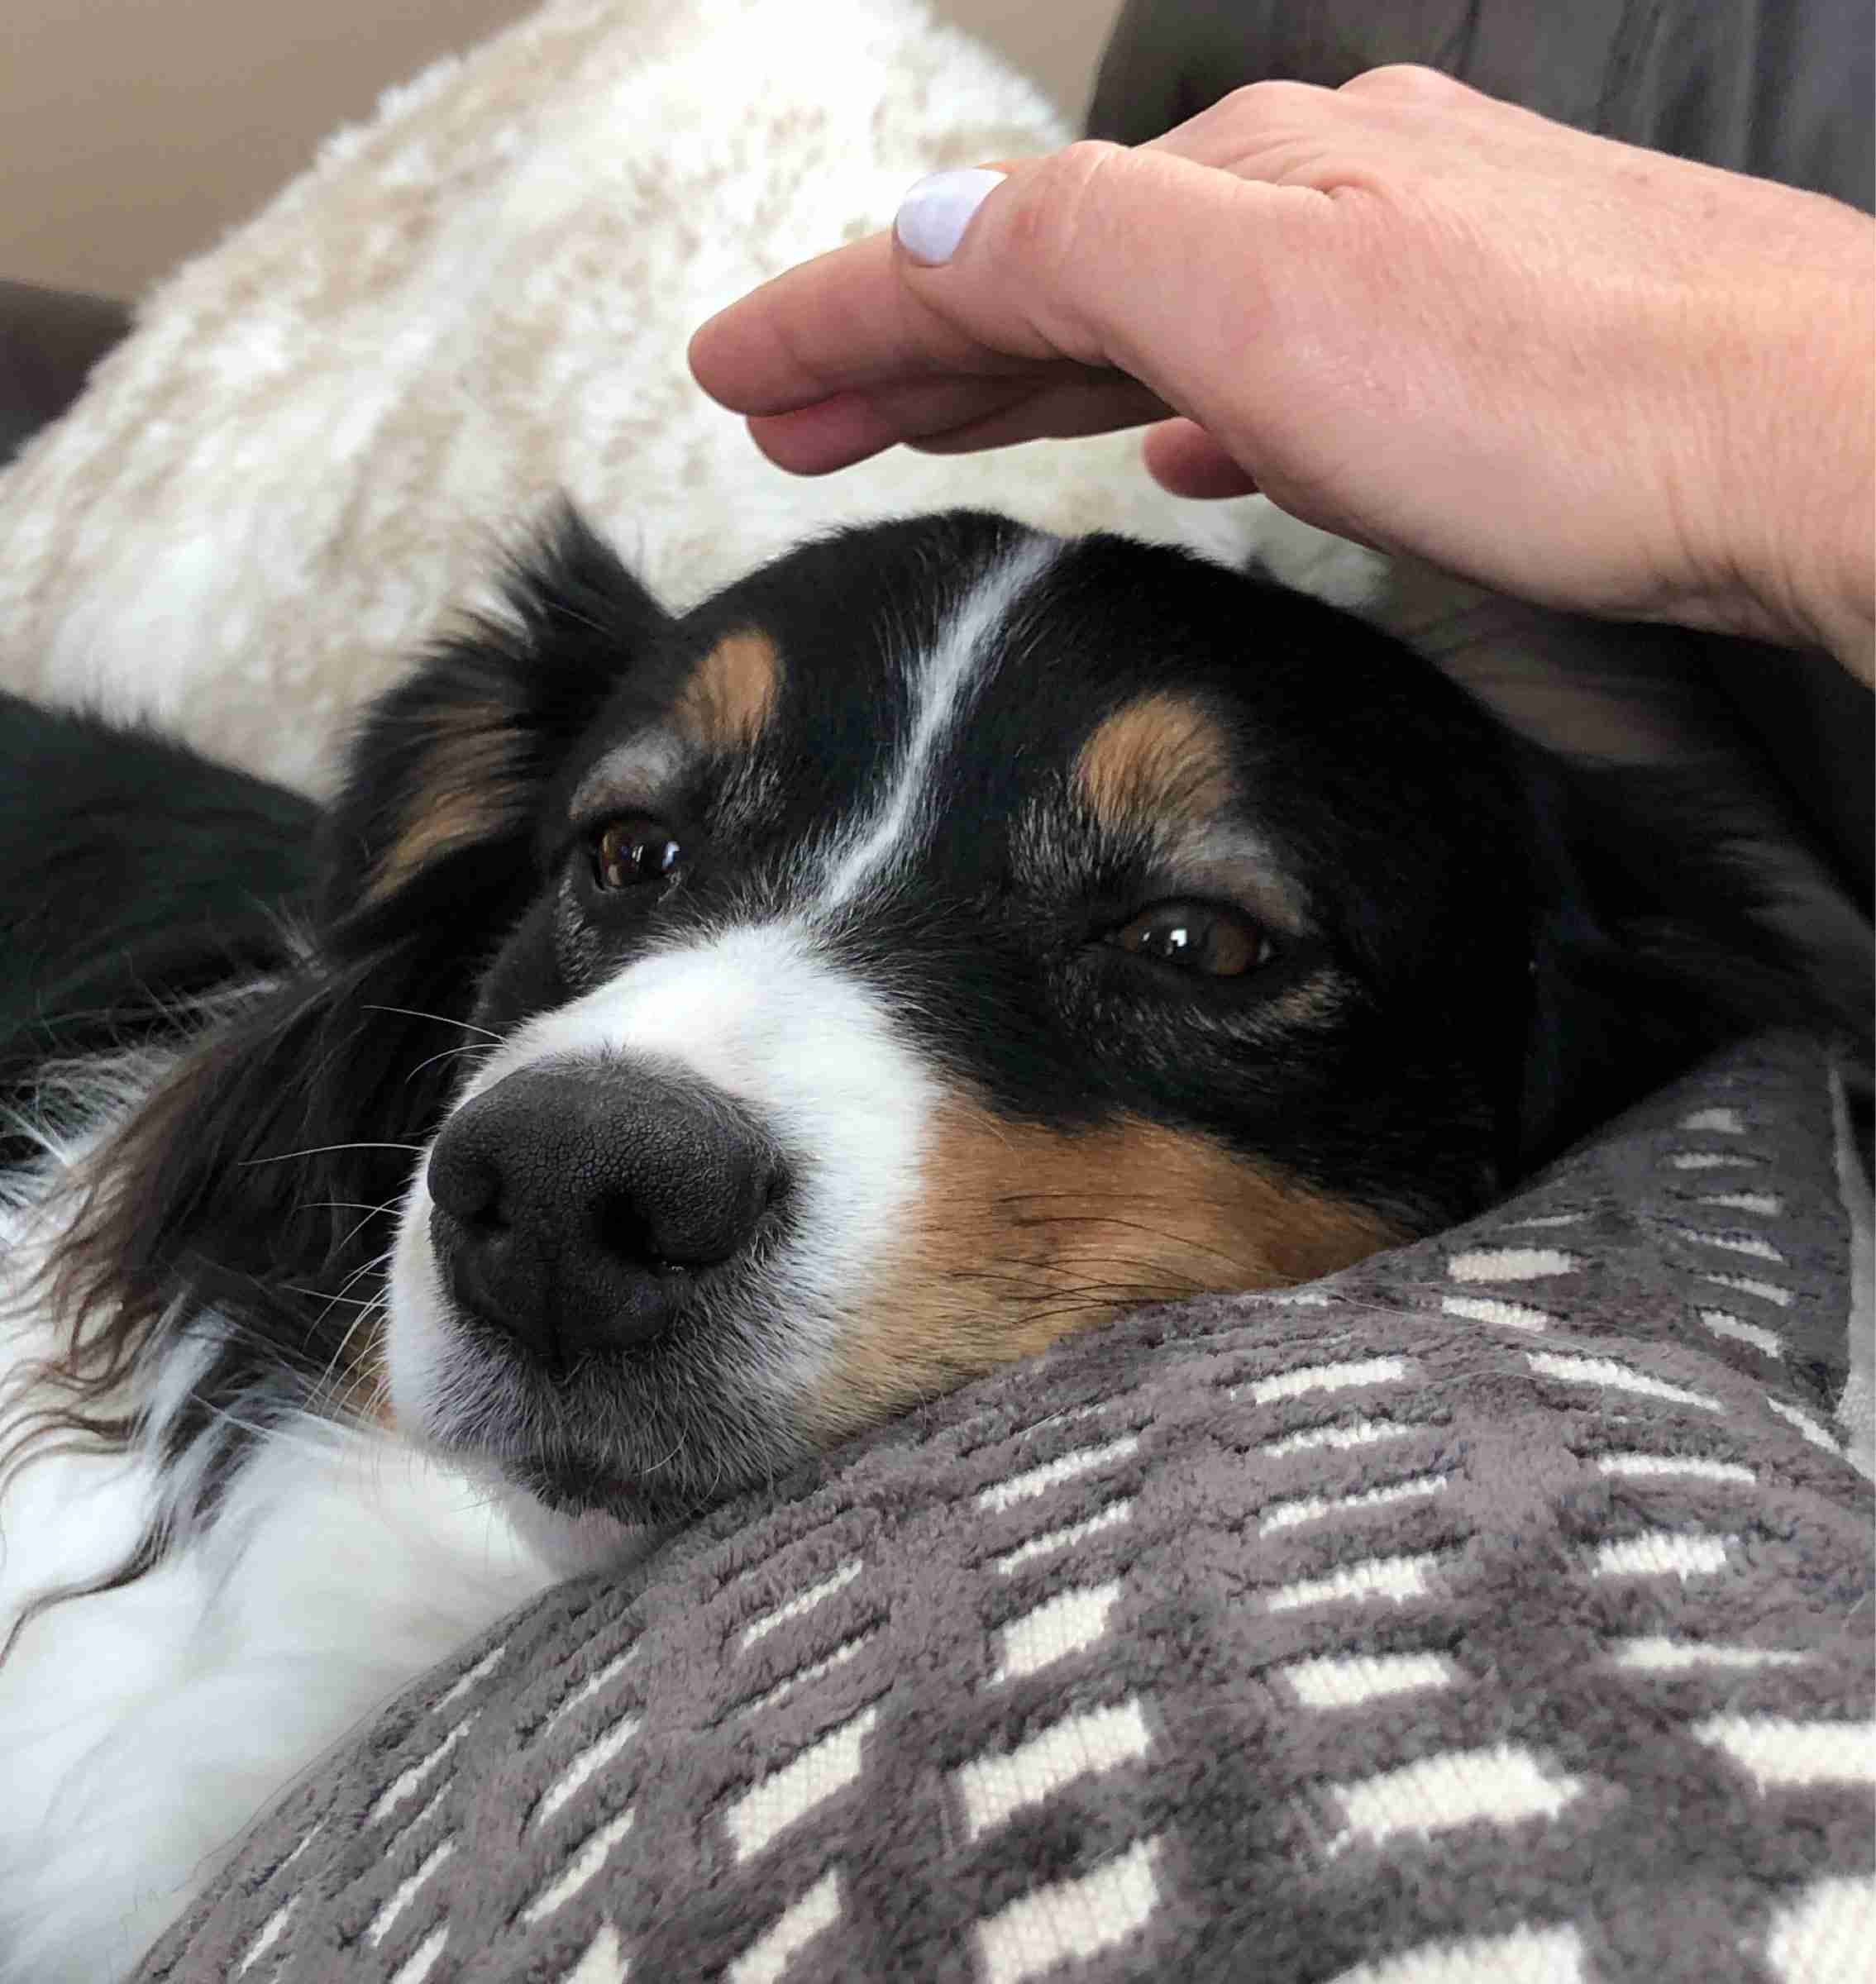 Reiki for Pets to help reduce anxiety, stress and promote health